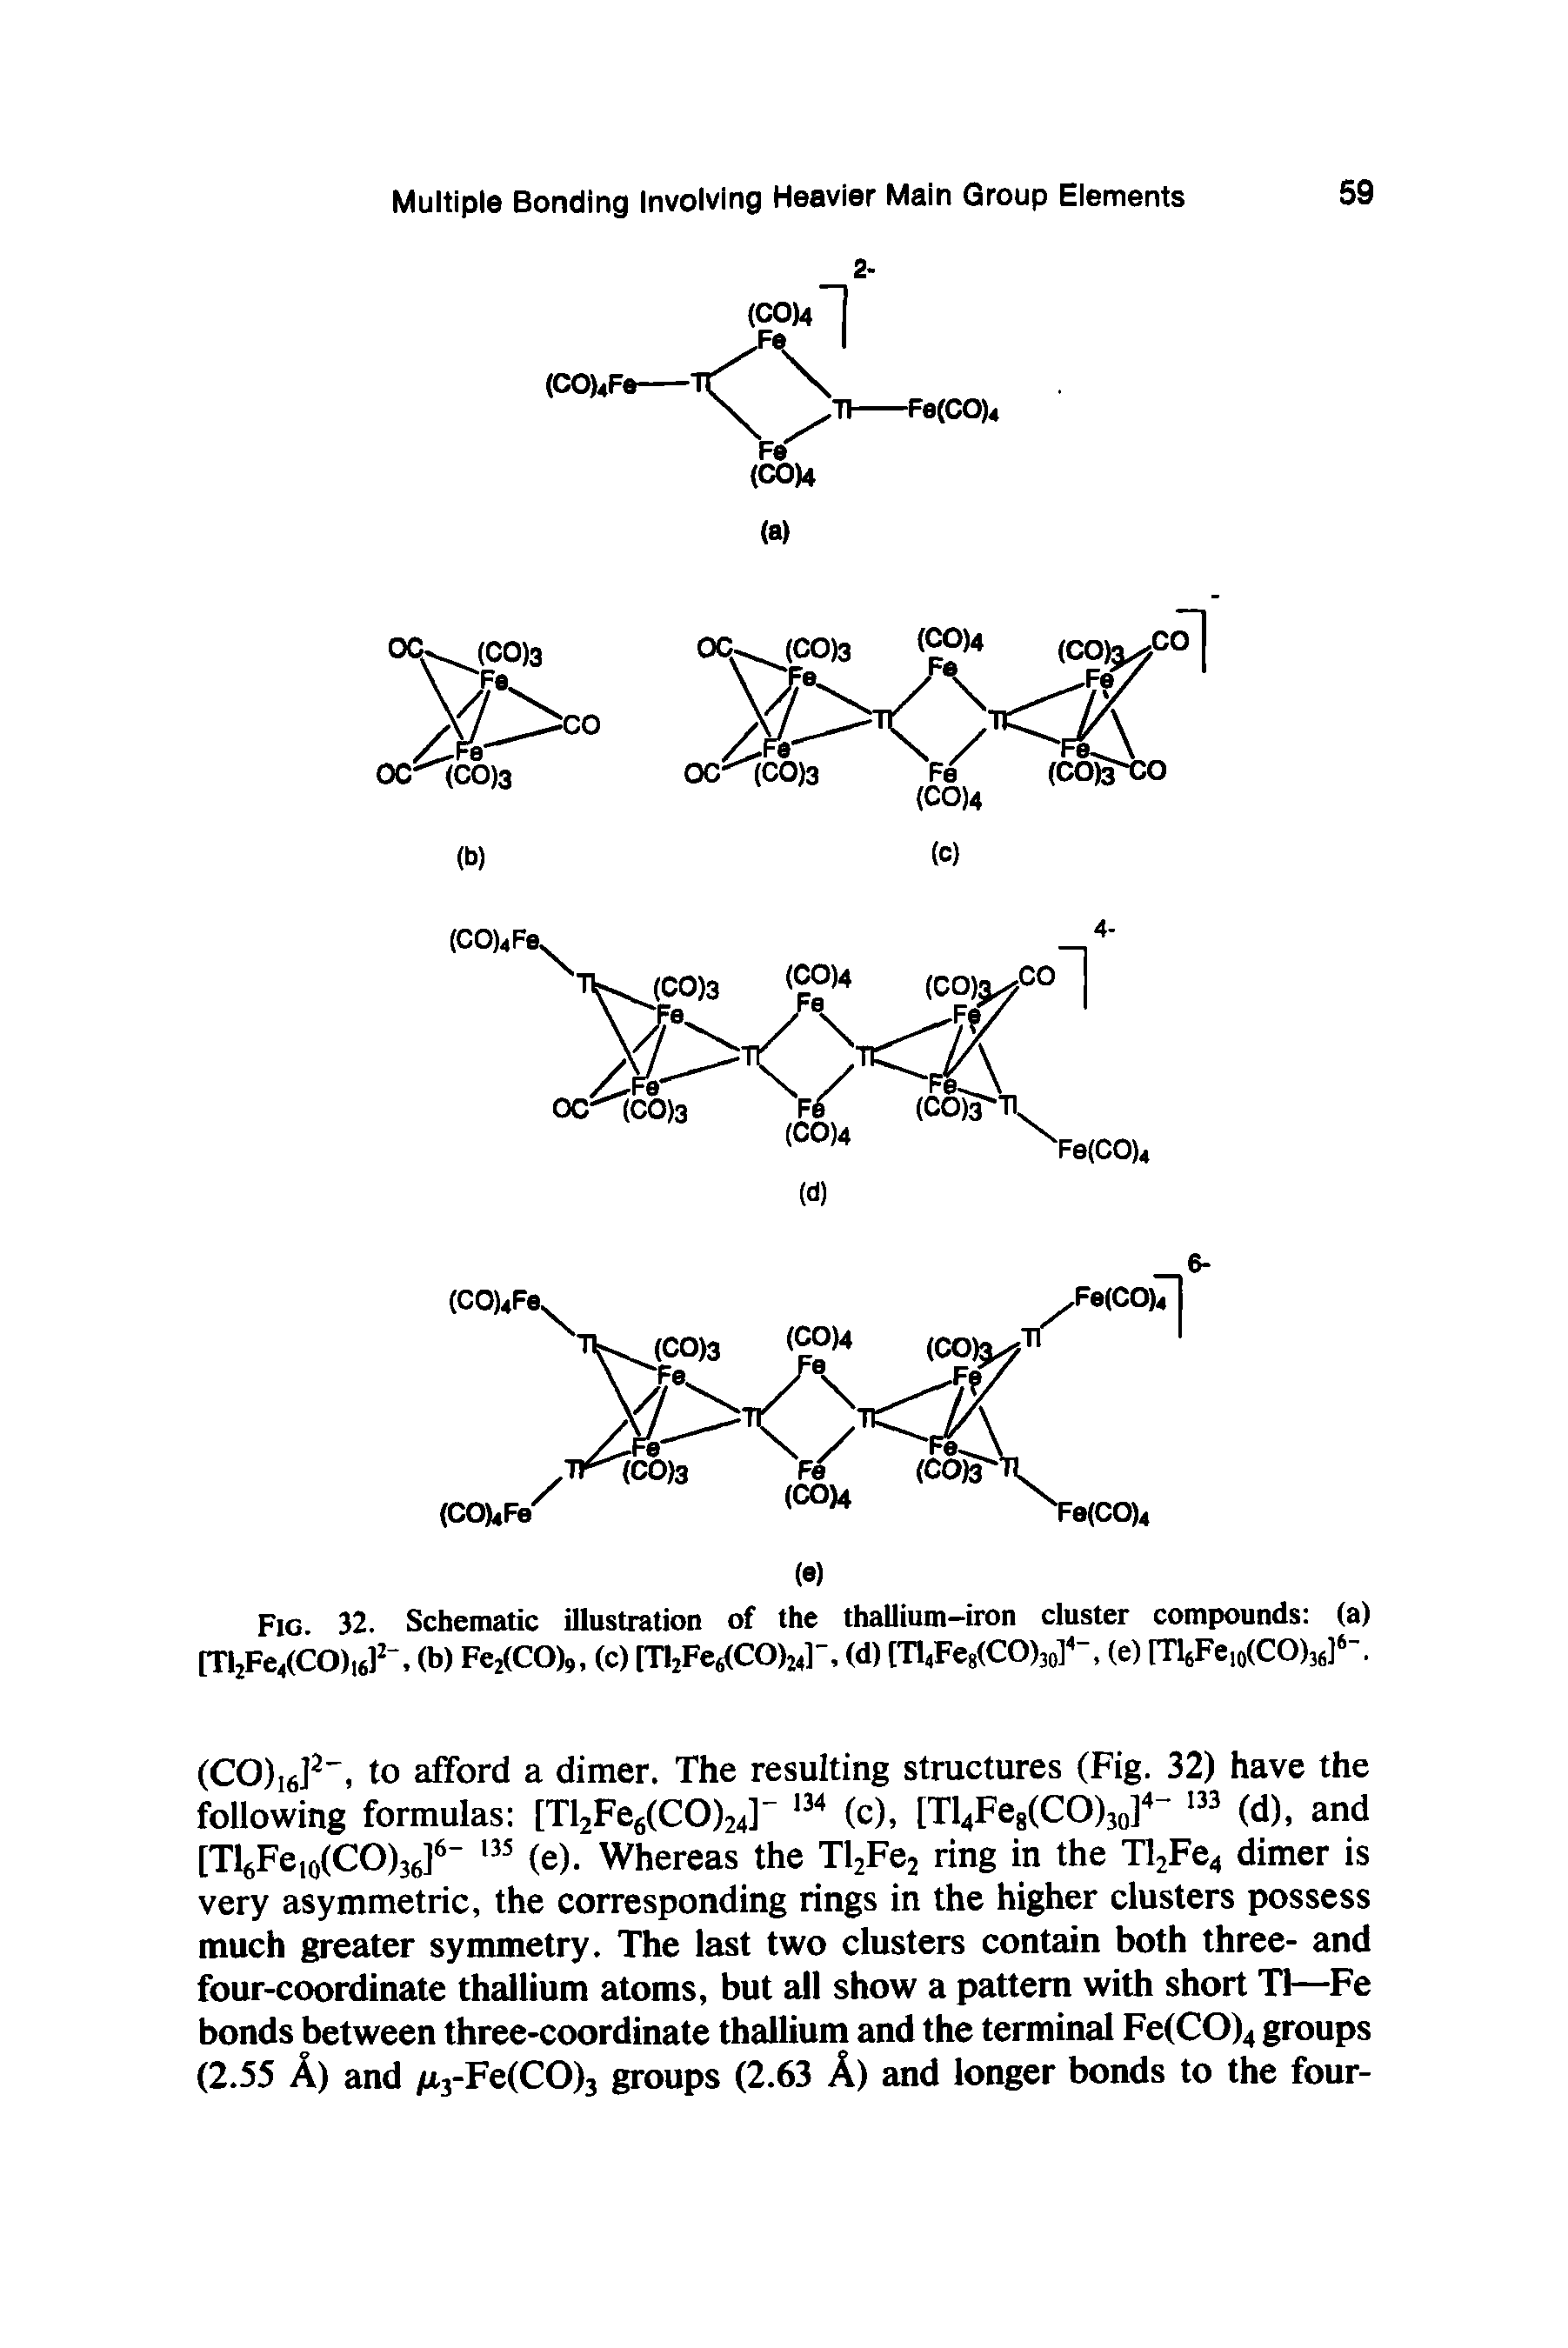 Fig. 32. Schematic illustration of the thallium-iron cluster compounds (a) [TI2Fe4(CO)I6]2-, (b) Fe2(CO) (c) [Tl2Fe6(CO)Mr, (d) [Tl4Fe8(CO)3o]4-. (e) [TleFe COy6-.